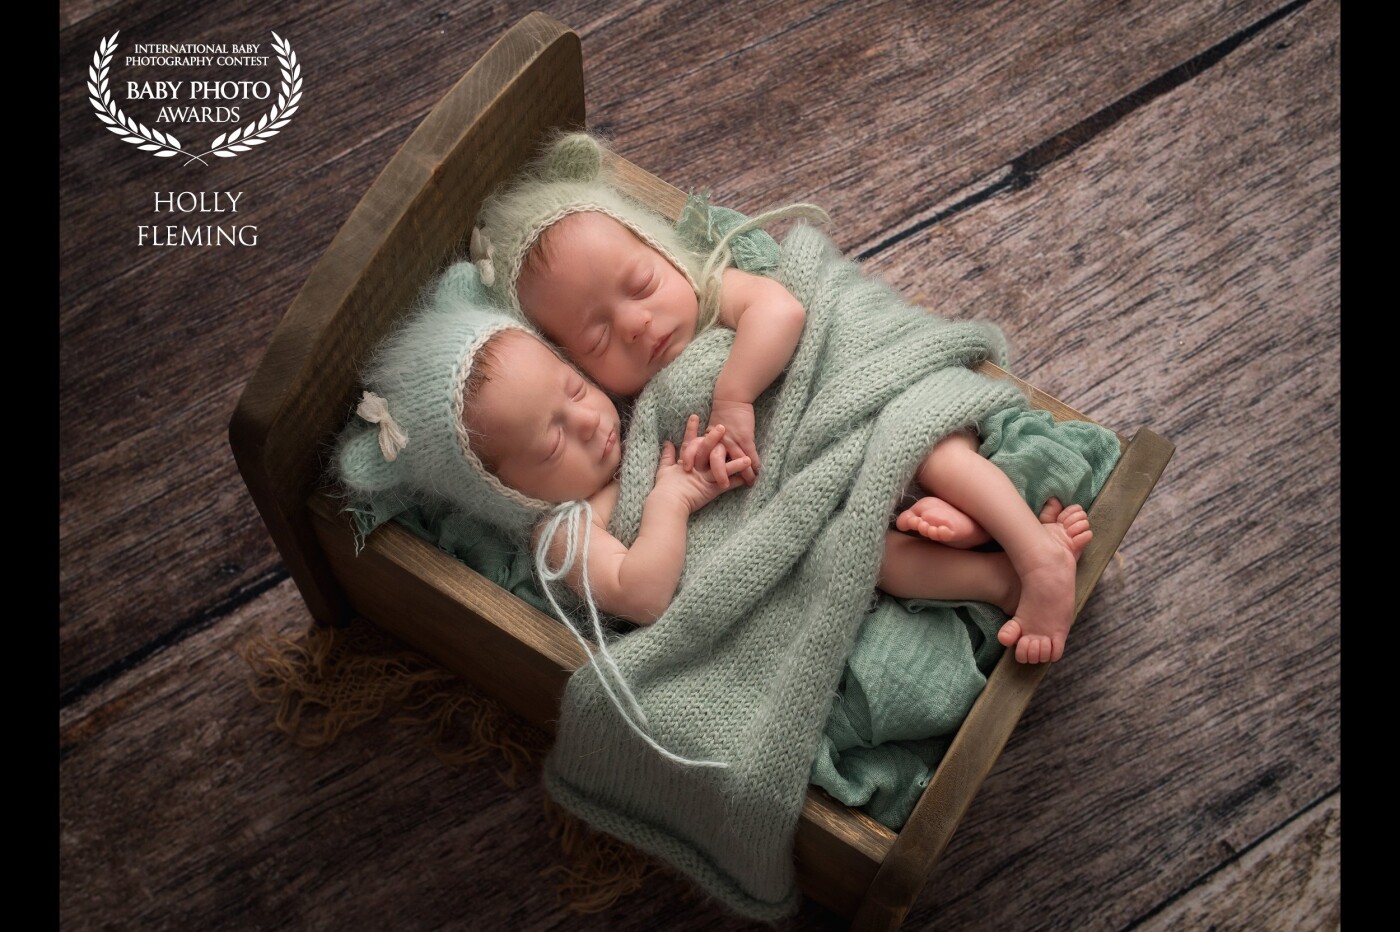 These little angels were not expected to make it. They endured surgery while in the womb and weeks in the NICU. And here there are. Tiny little miracles! ❤️